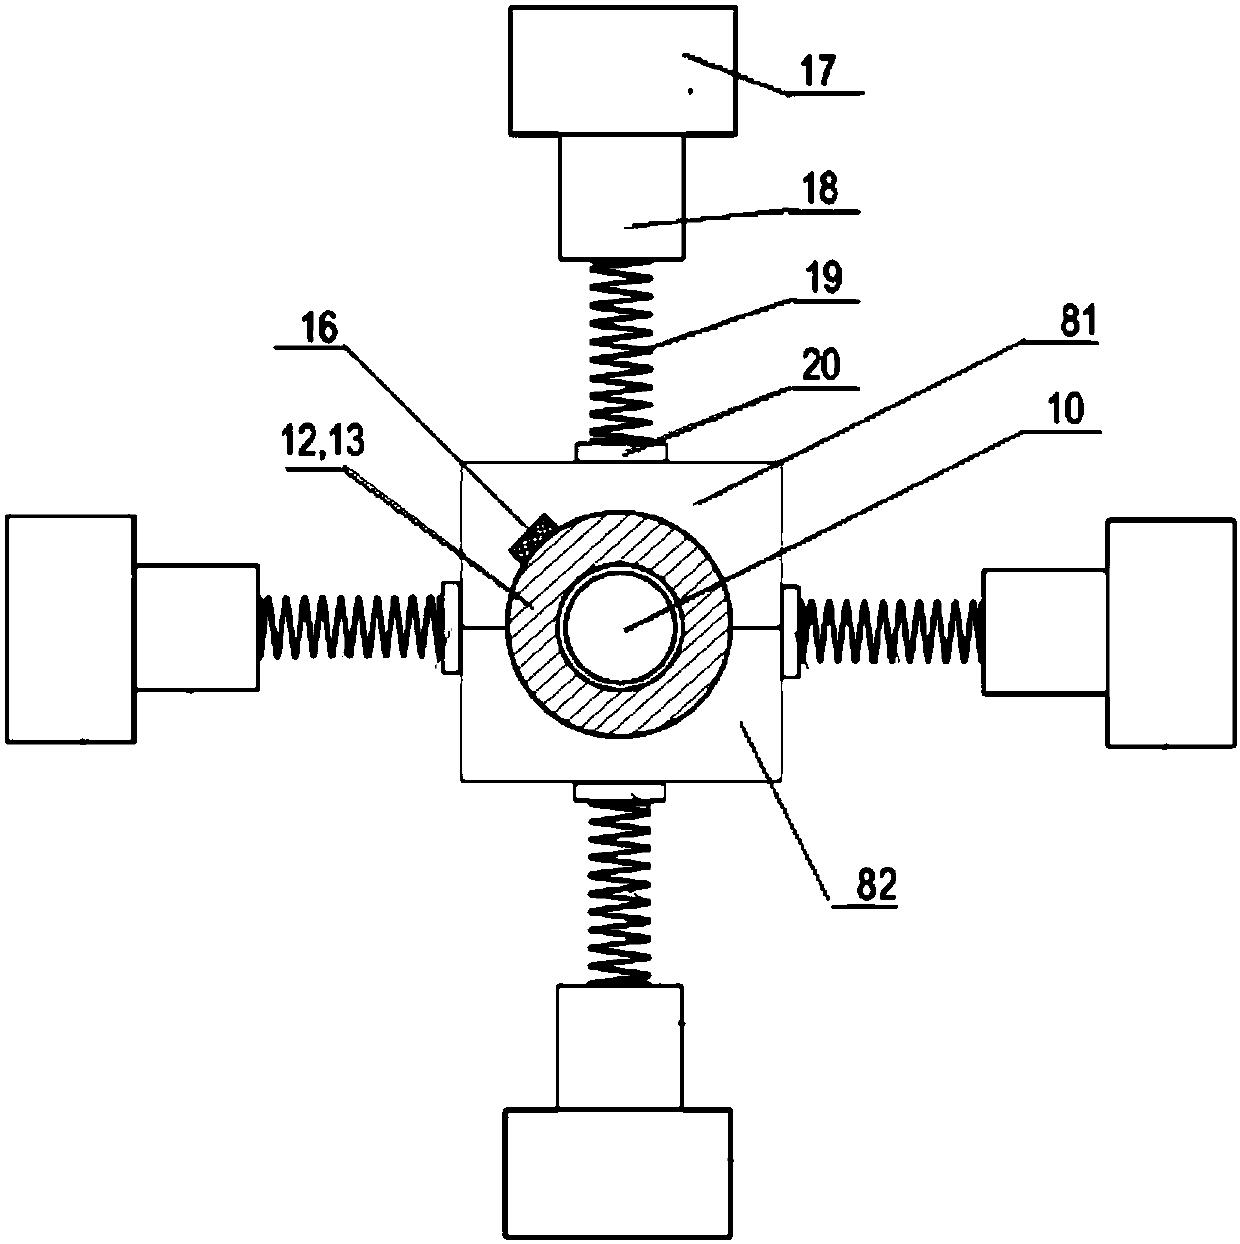 System for testing fatigue life of rolling bearing by loading radial alternating load through conveying belt